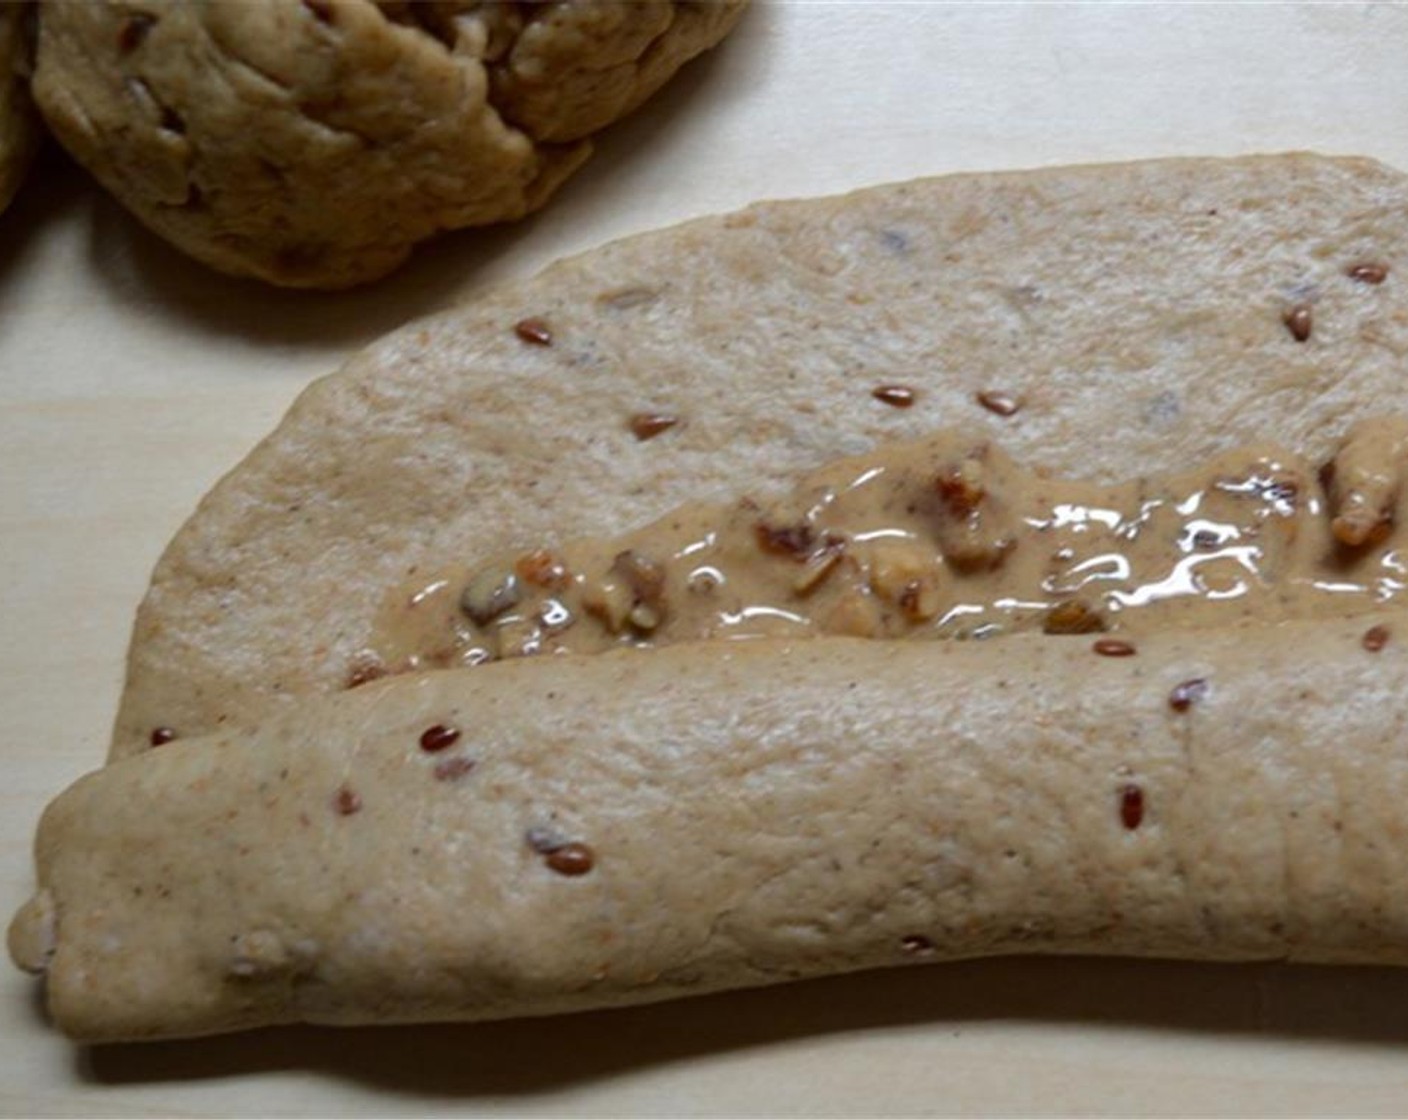 step 6 Roll out each dough piece one by one, and add the Tahini (1 cup) and Mixed Dried Fruits and Nuts (1 cup) mixture to it, being careful not to spread it out too close to the sides. Then roll the dough into a long cigar shape. Let them sit for 20 minutes.